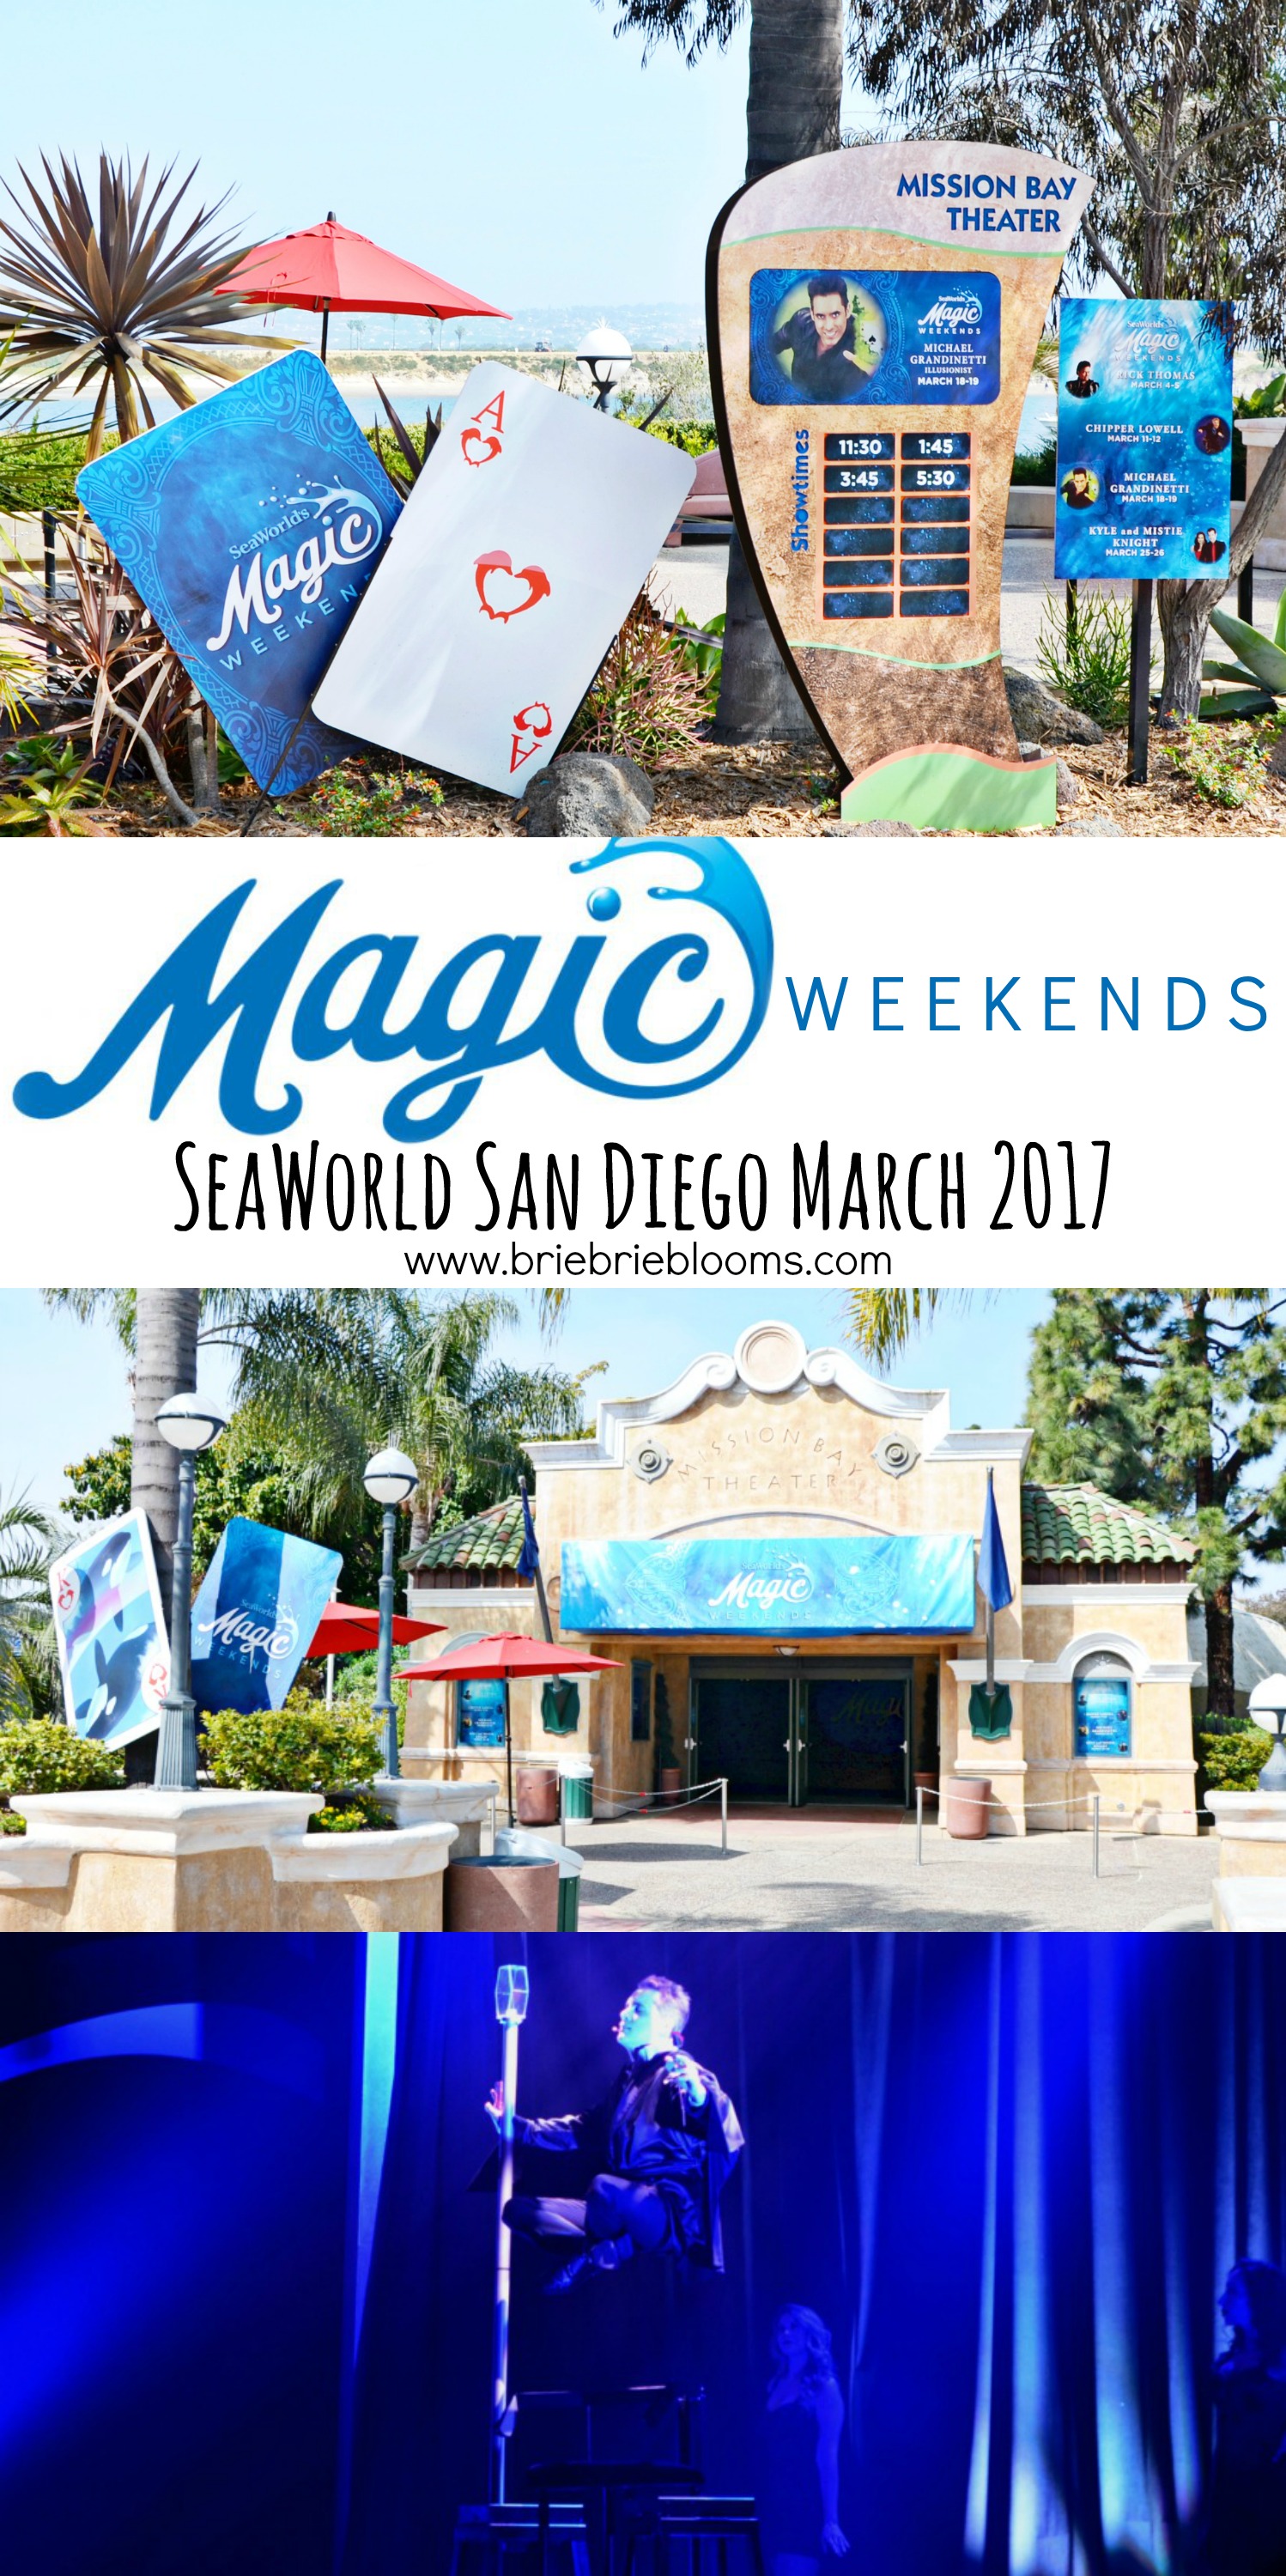 SeaWorld's Magic Weekends continue to delight and astound with fun through March 2017. Park admission includes an illusionist show and more.